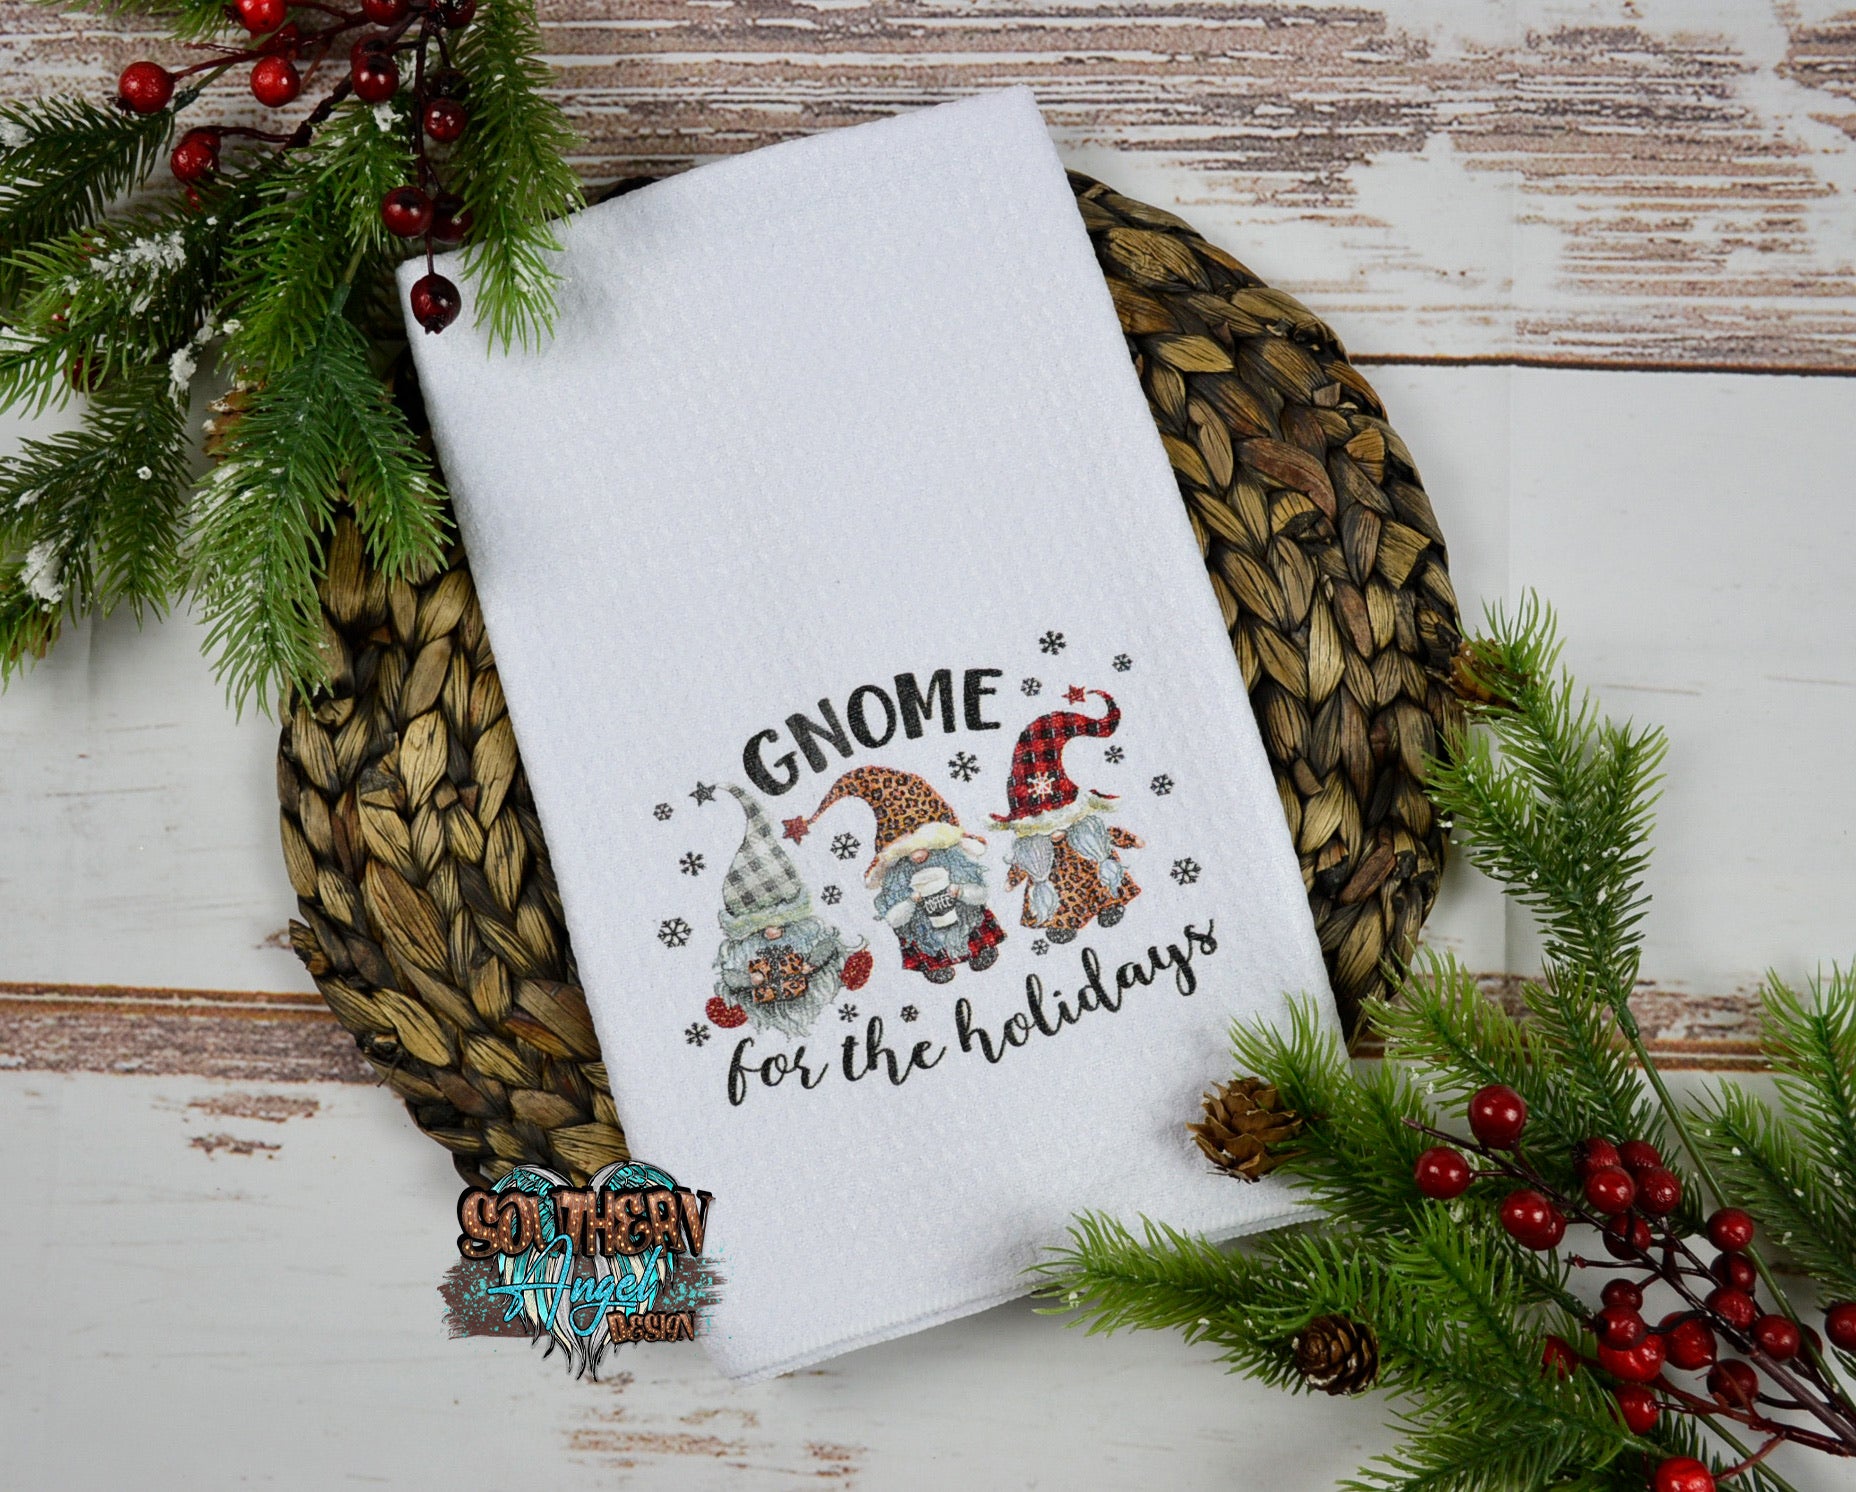 Gray Gnome For The Holiday Kitchen Towel image_ebb69553-8b8e-445c-9a05-696e8463a7ae.jpg gnome-for-the-holiday-kitchen-towel Kitchen Towel